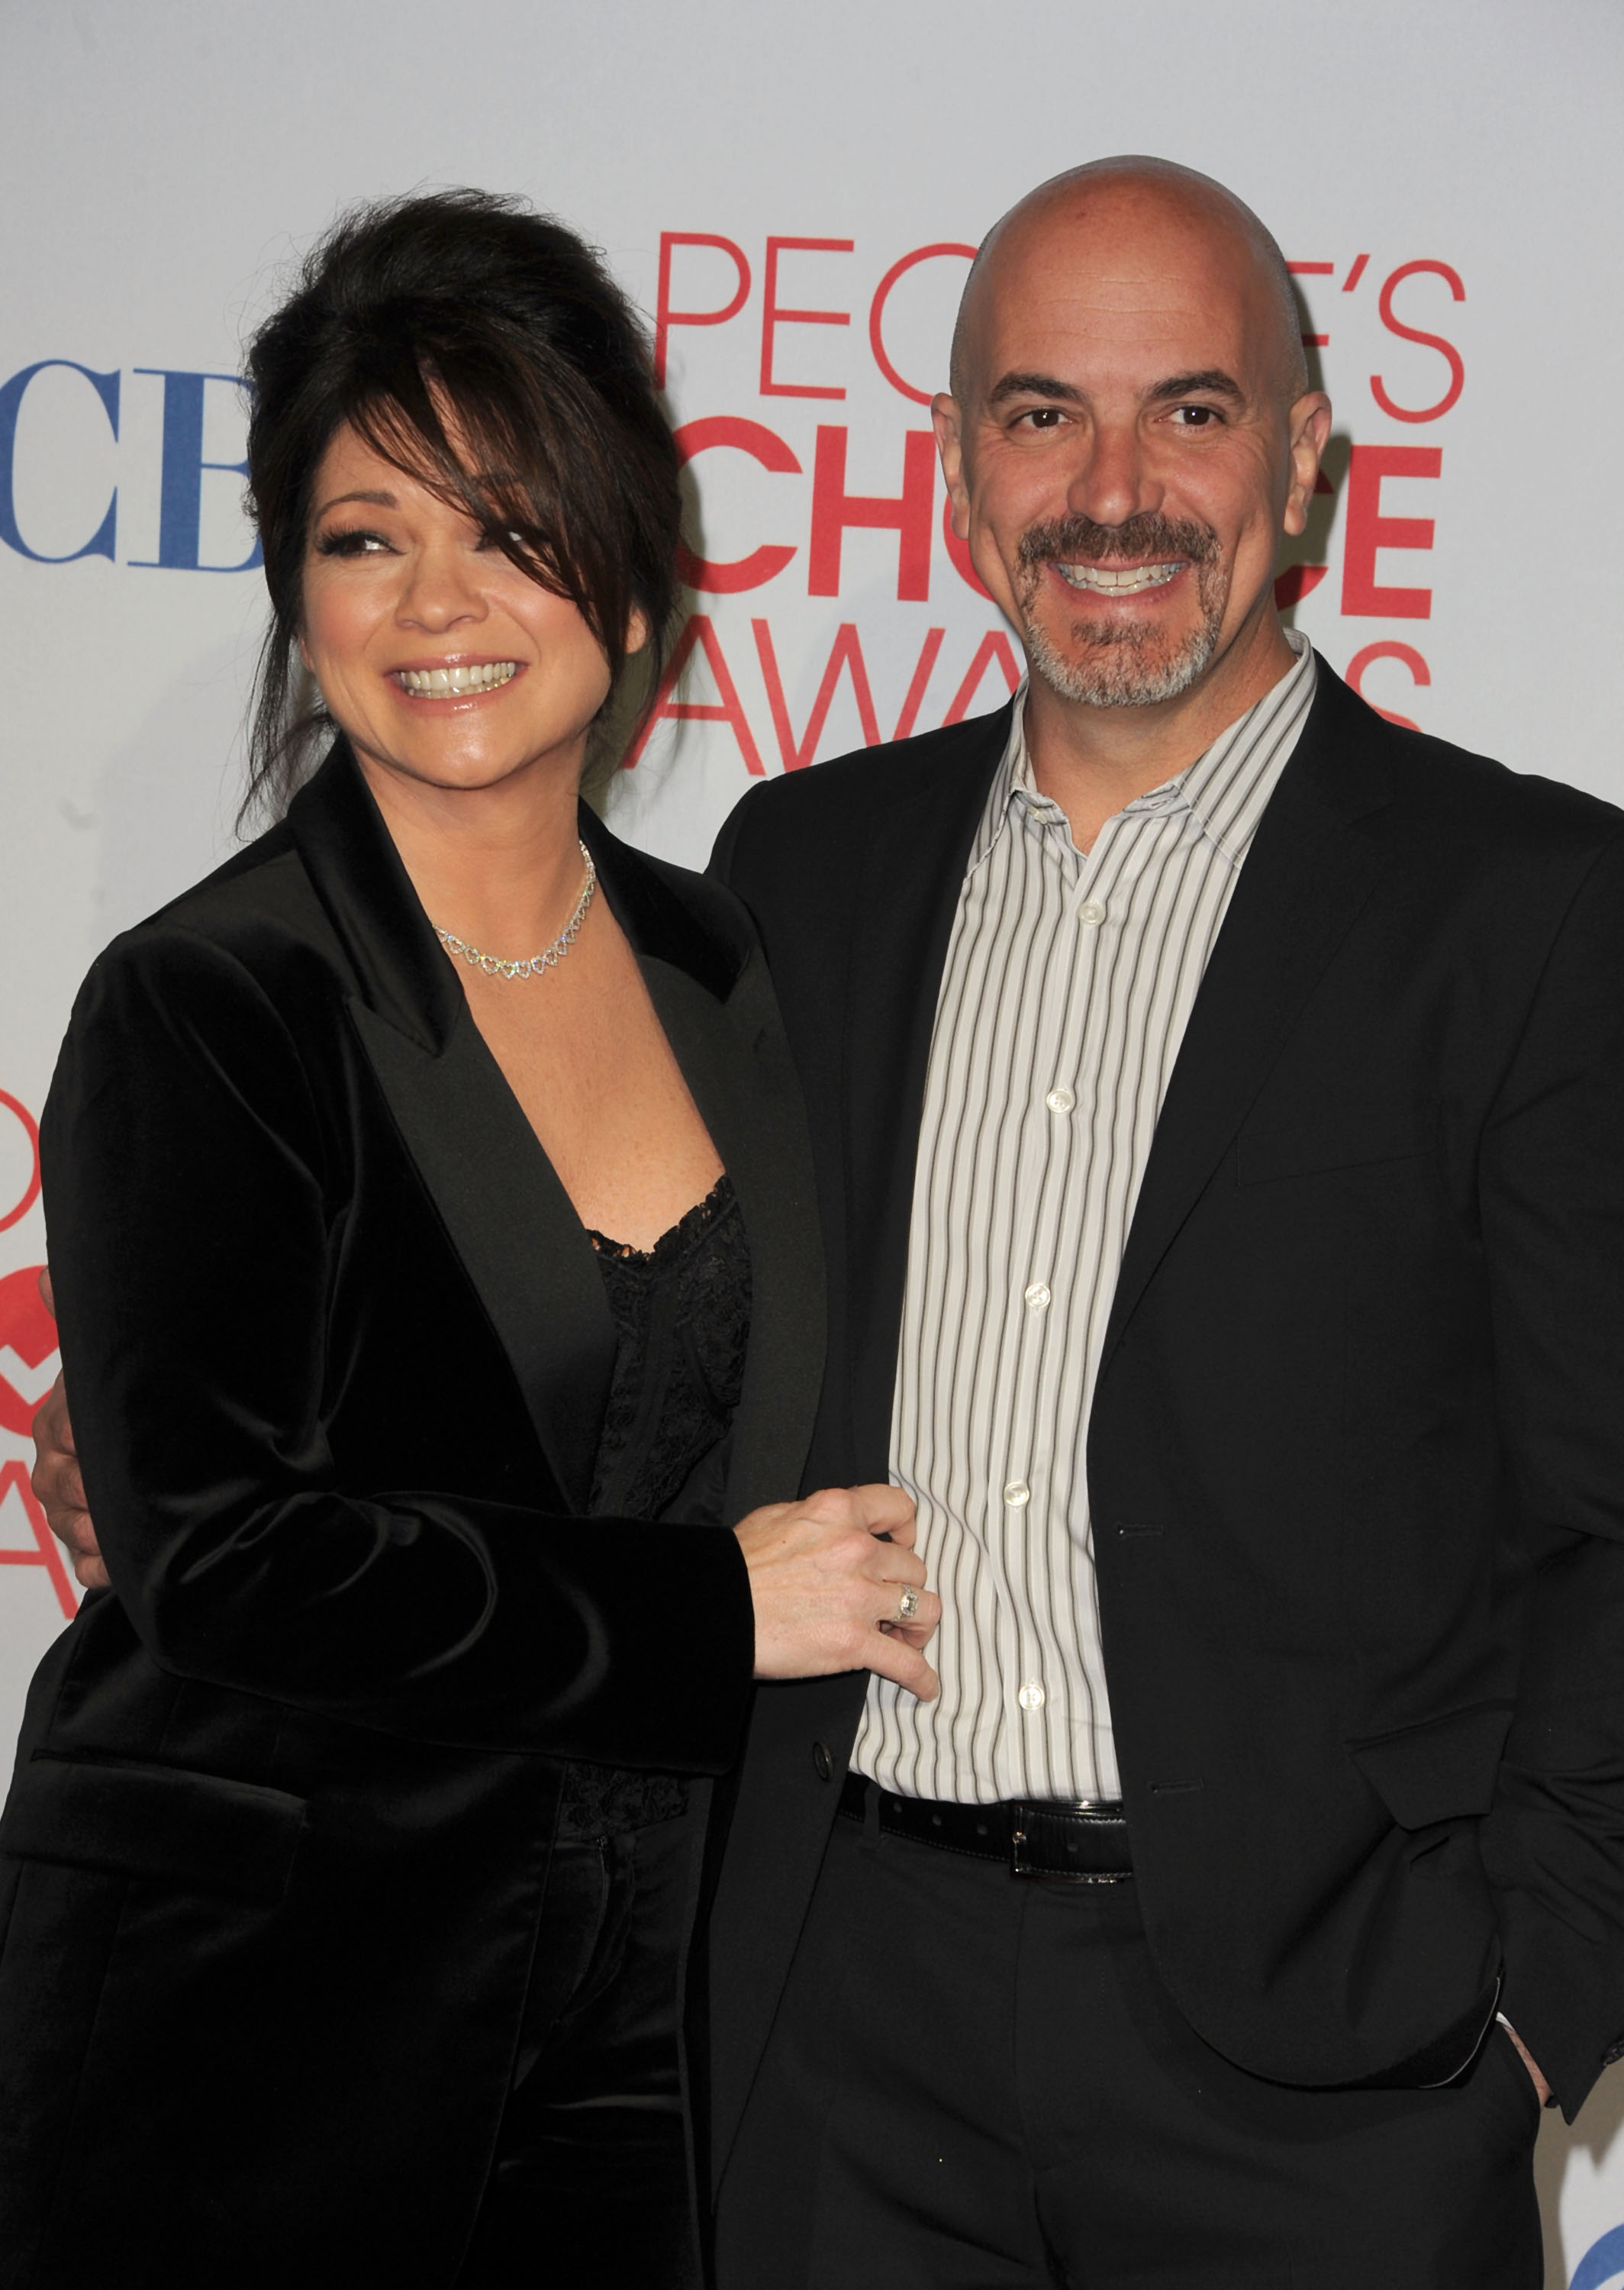 Valerie Bertinelli and Tom Vitale at the People's Choice Awards in Los Angeles, California on January 11, 2012 | Source: Getty Images